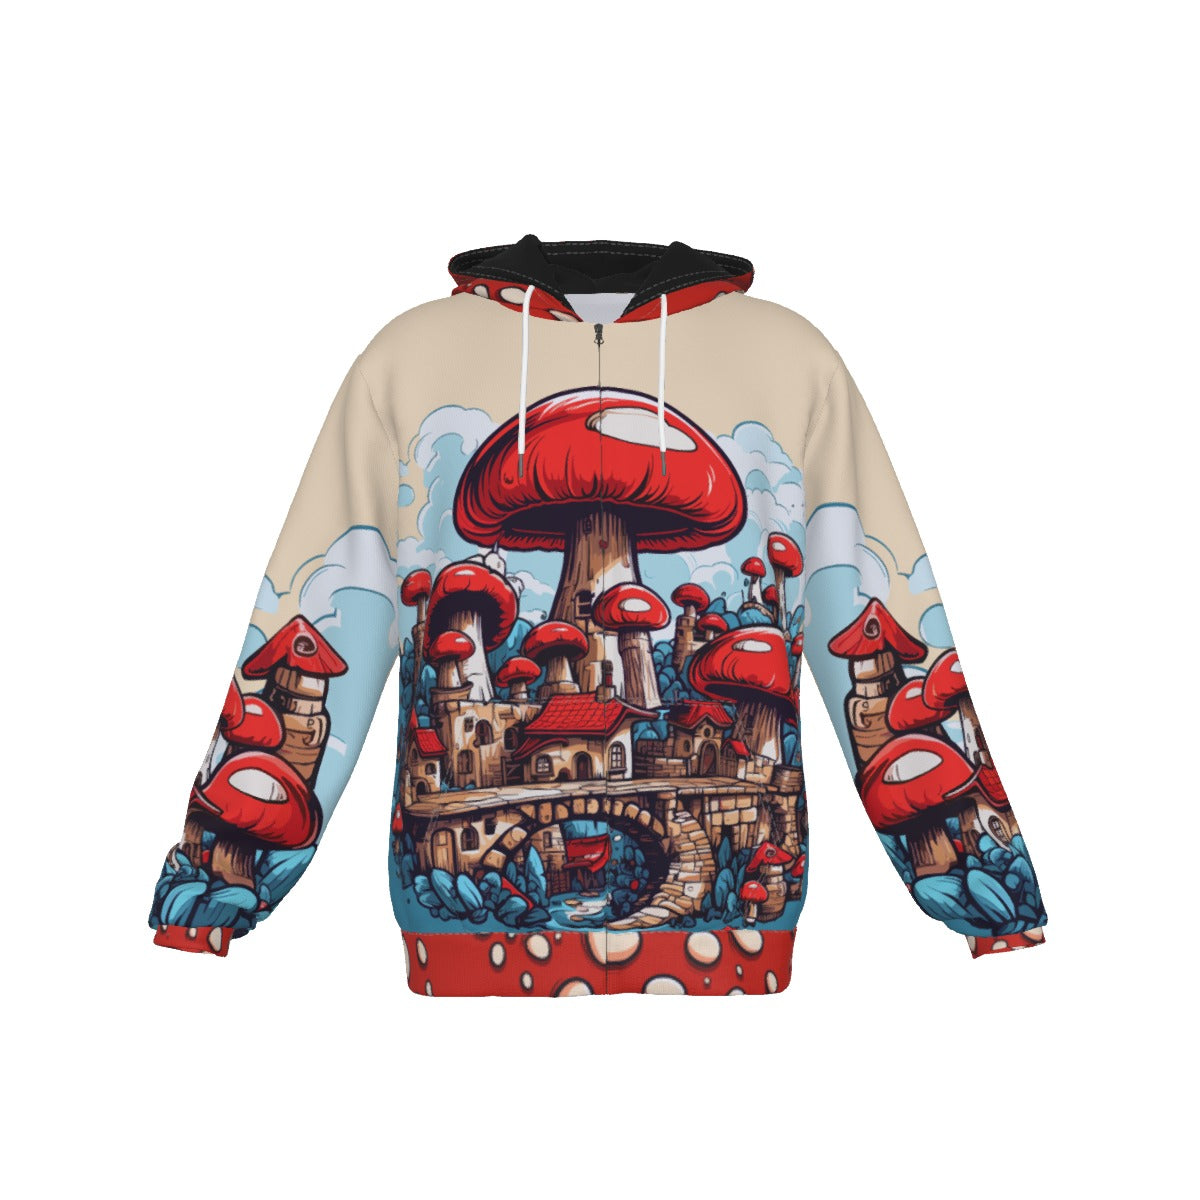 Enchanted Forest Red Mushroom Fantasy Zip-Up Hoodie – All-Over Print Fairy Tale Fungi Apparel – Magical Mushroom Art Jacket for Men & Women